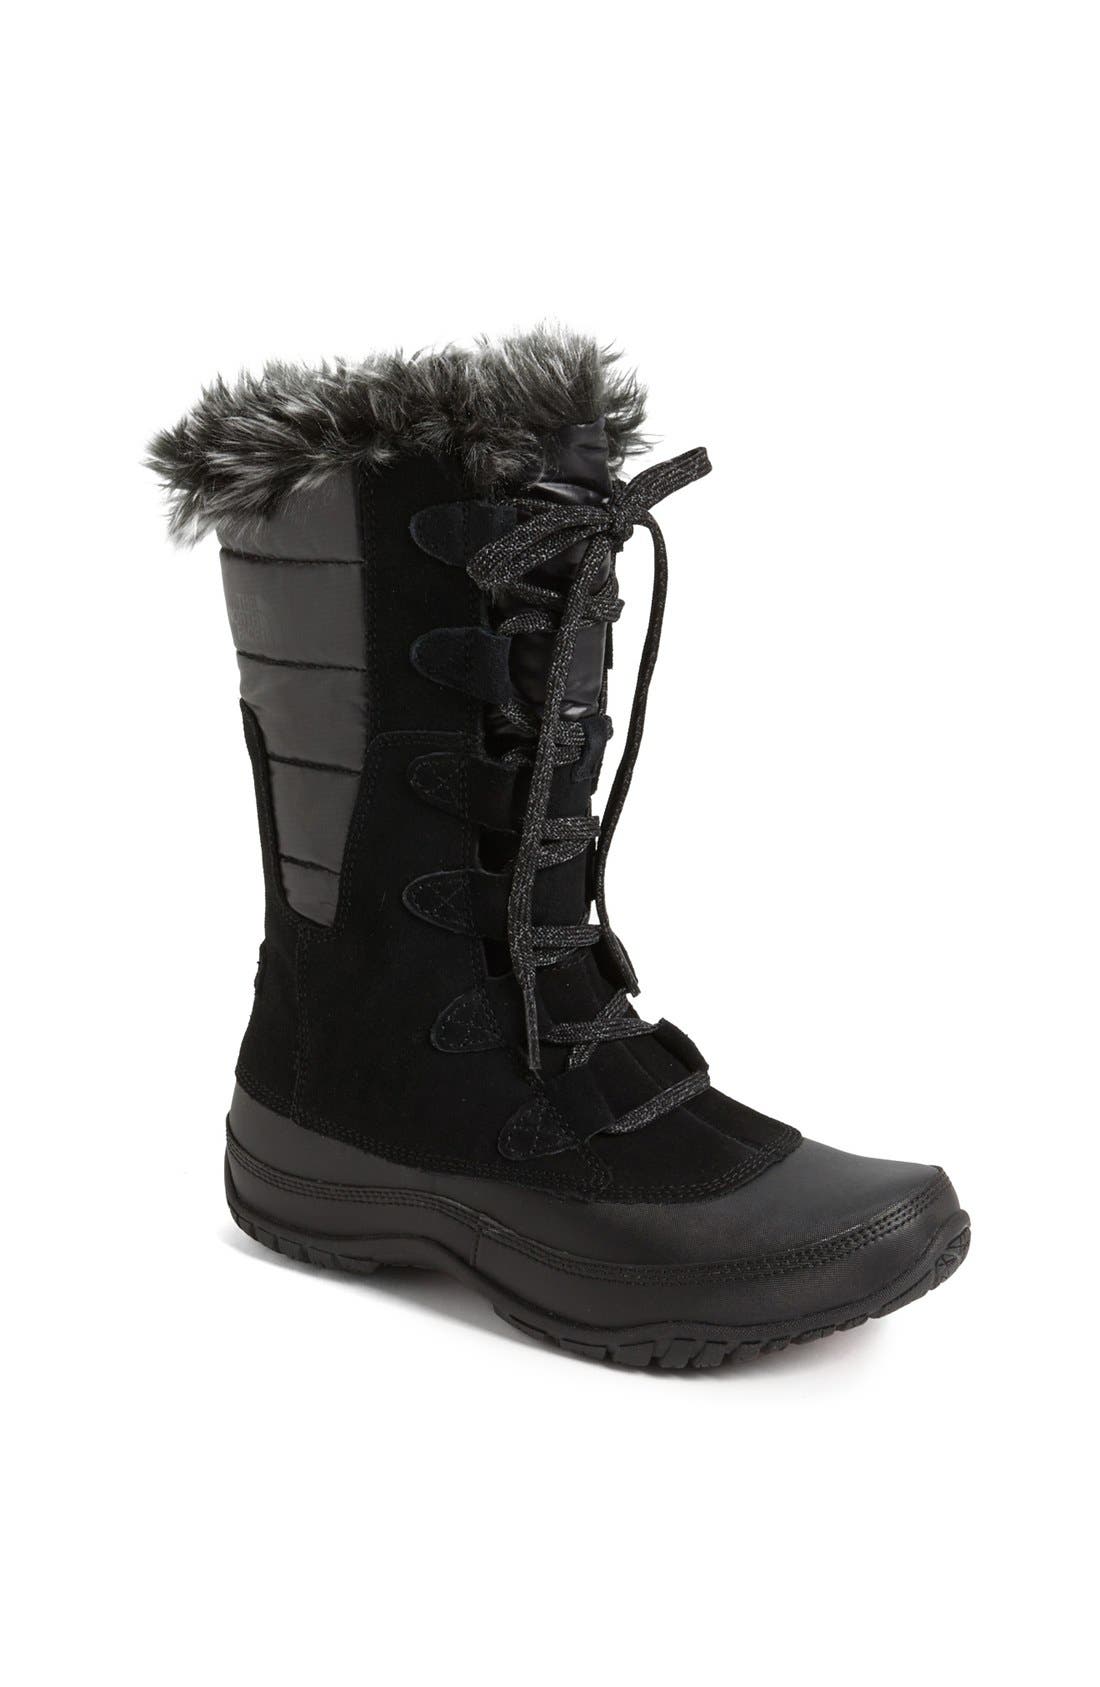 north face waterproof primaloft boots